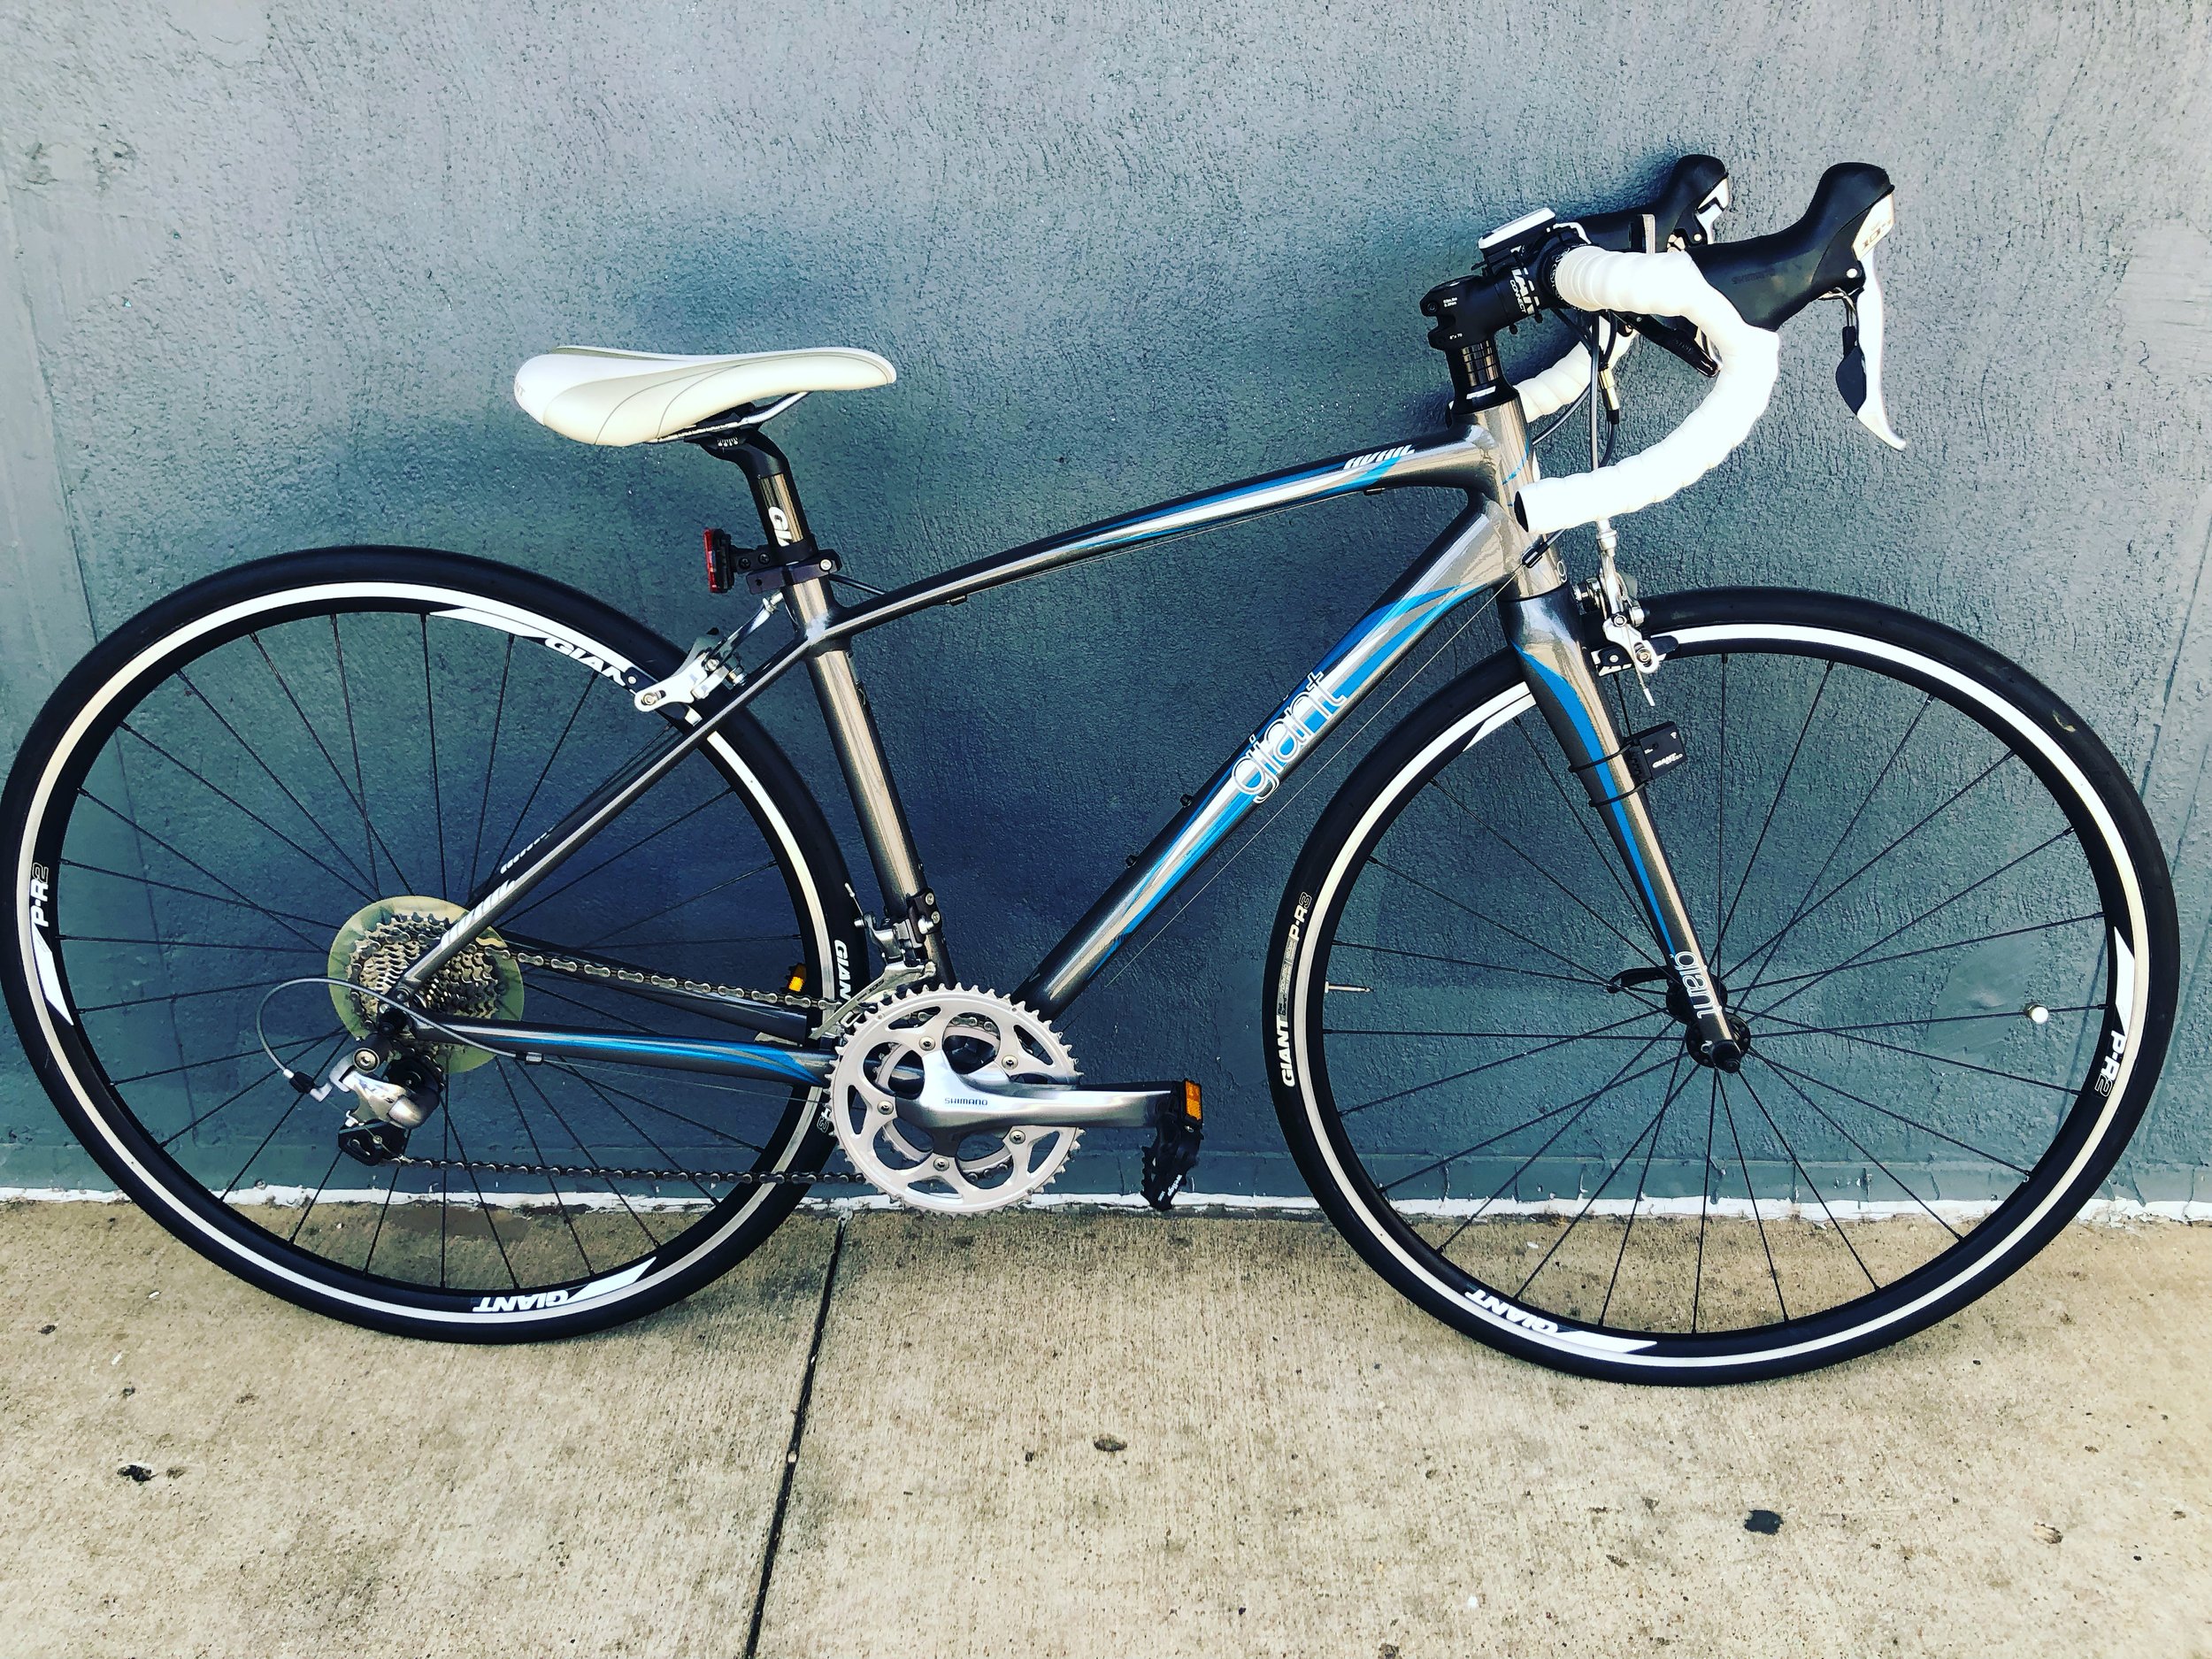 USED BIKES — COLONELS BICYCLES